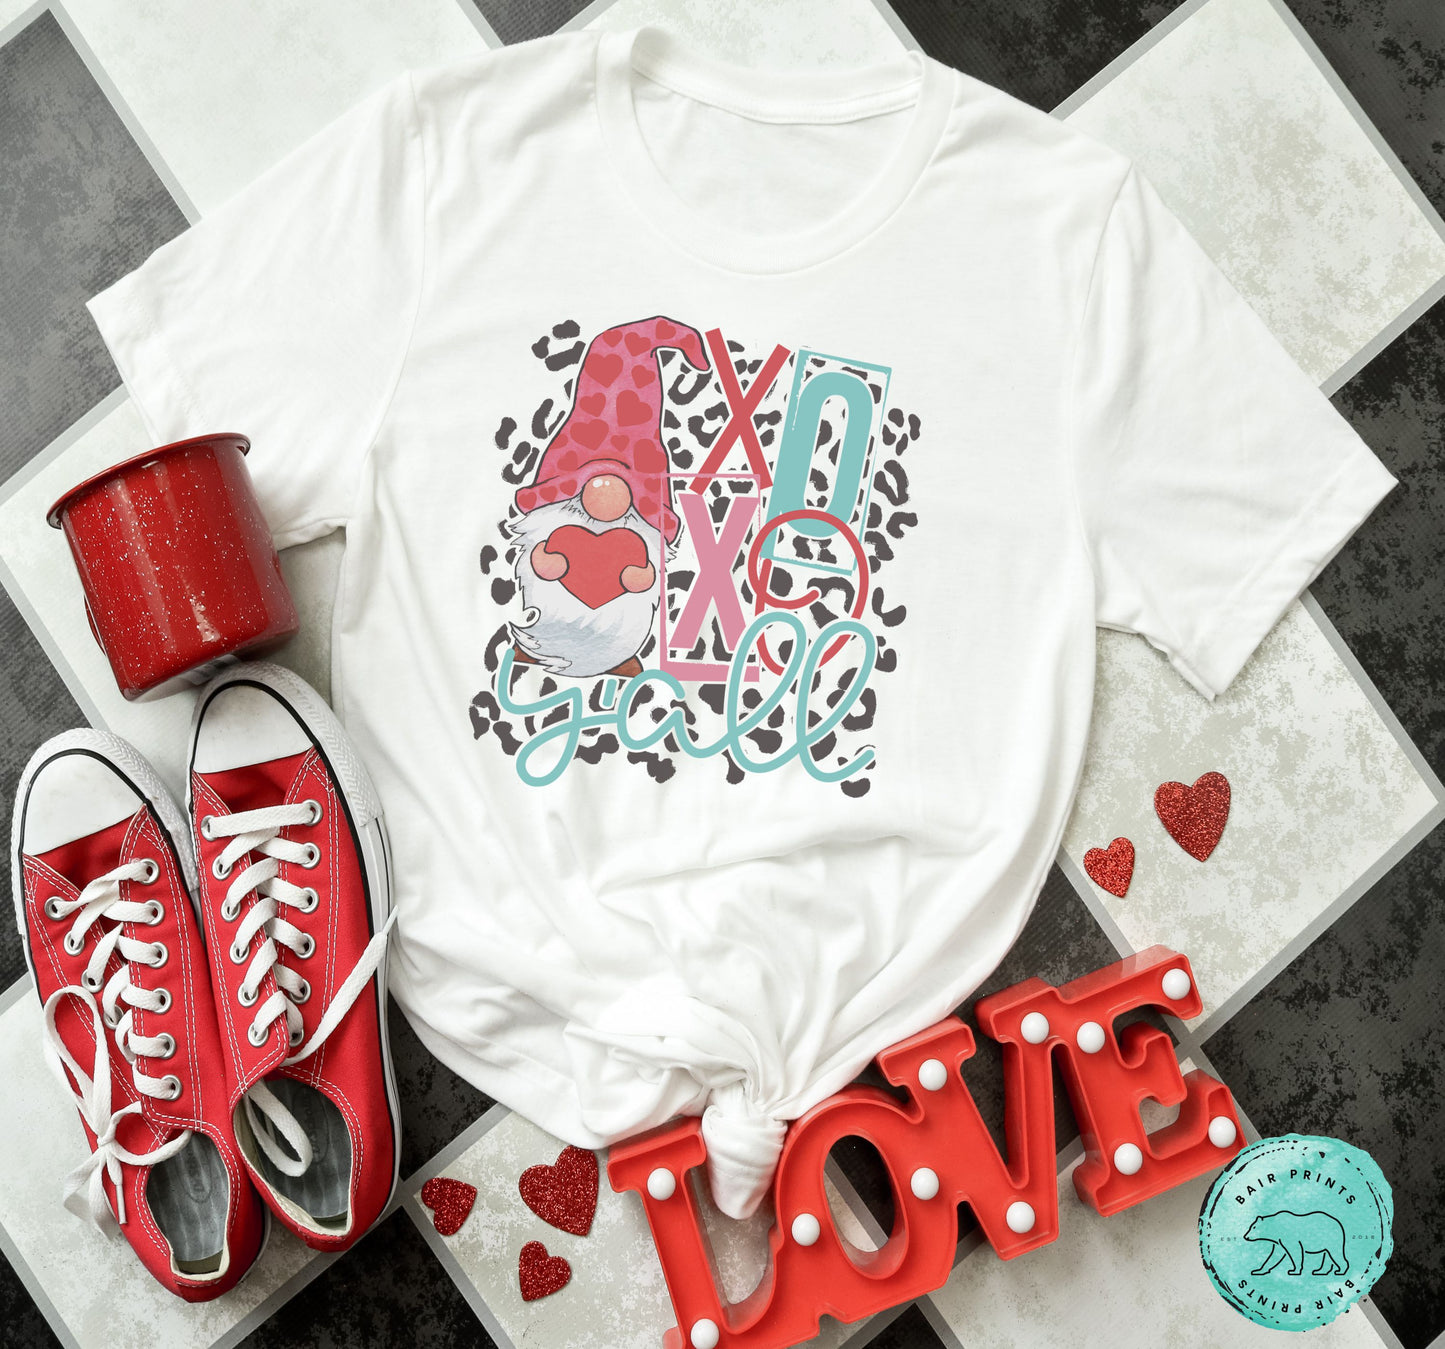 XOXO Y'all Ghome Shirt. Valentine Graphic Tee